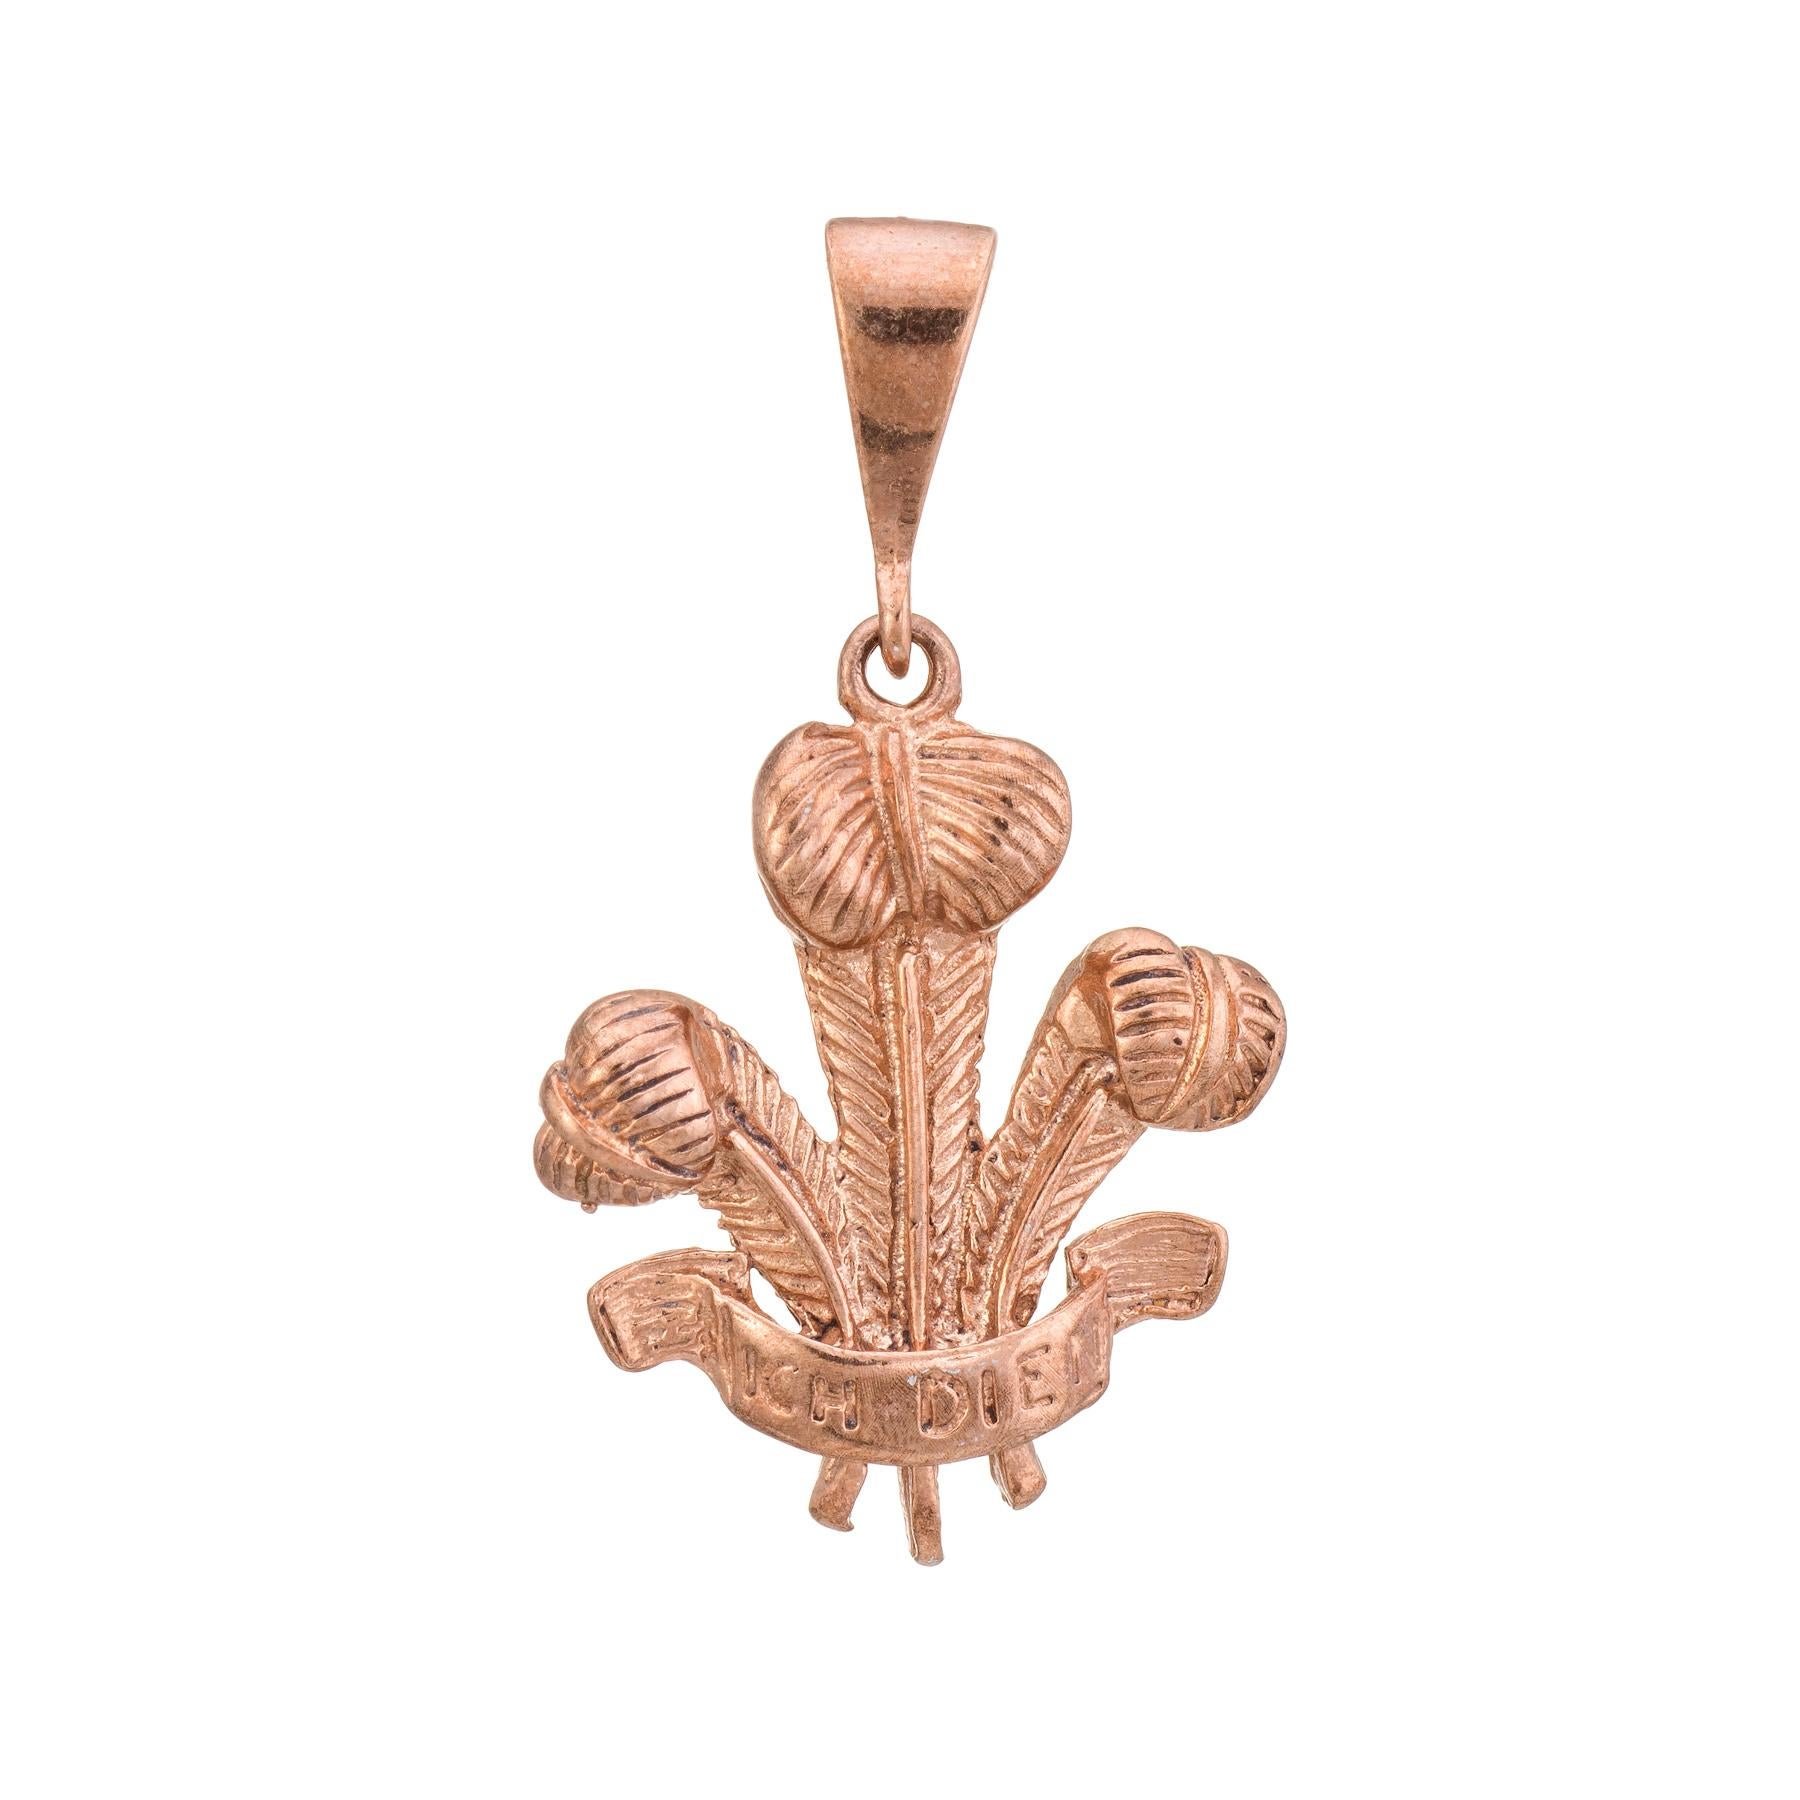 prince of wales feathers pendant